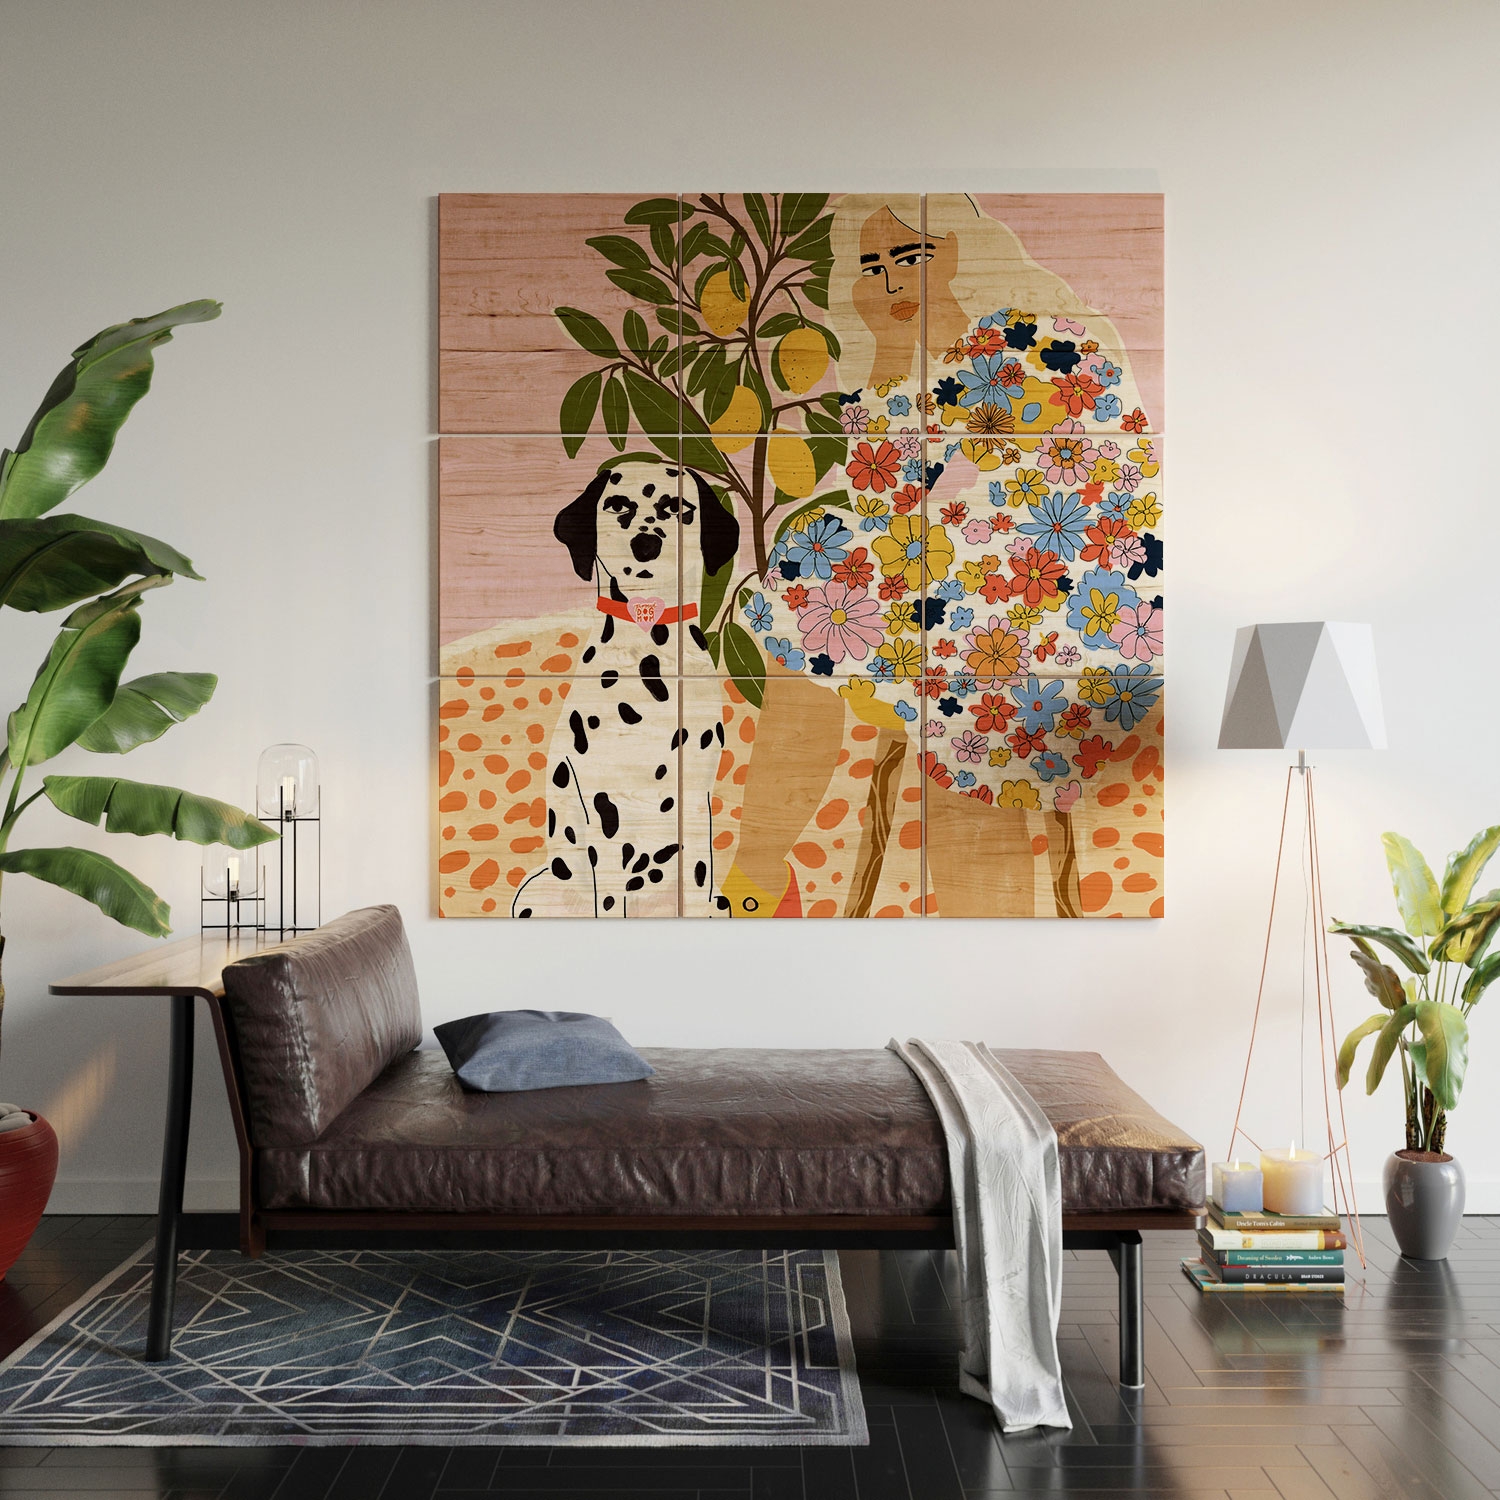 Chaotic Life by Alja Horvat - Wood Wall Mural3' X 3' (Nine 12" Wood Squares) - Image 4